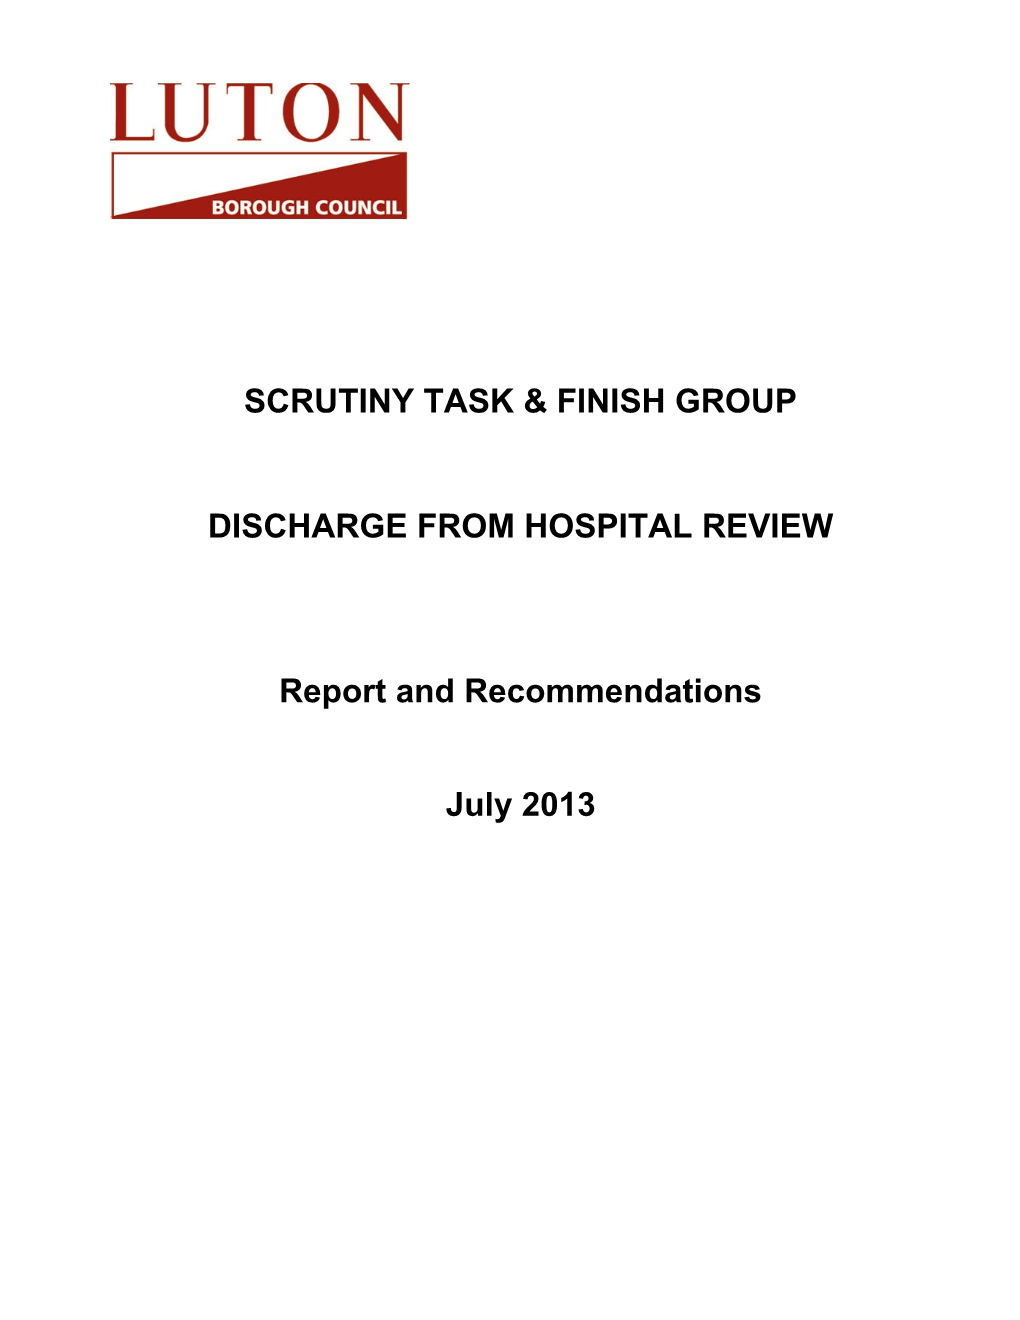 Discharge from Hospital Review - July 2013